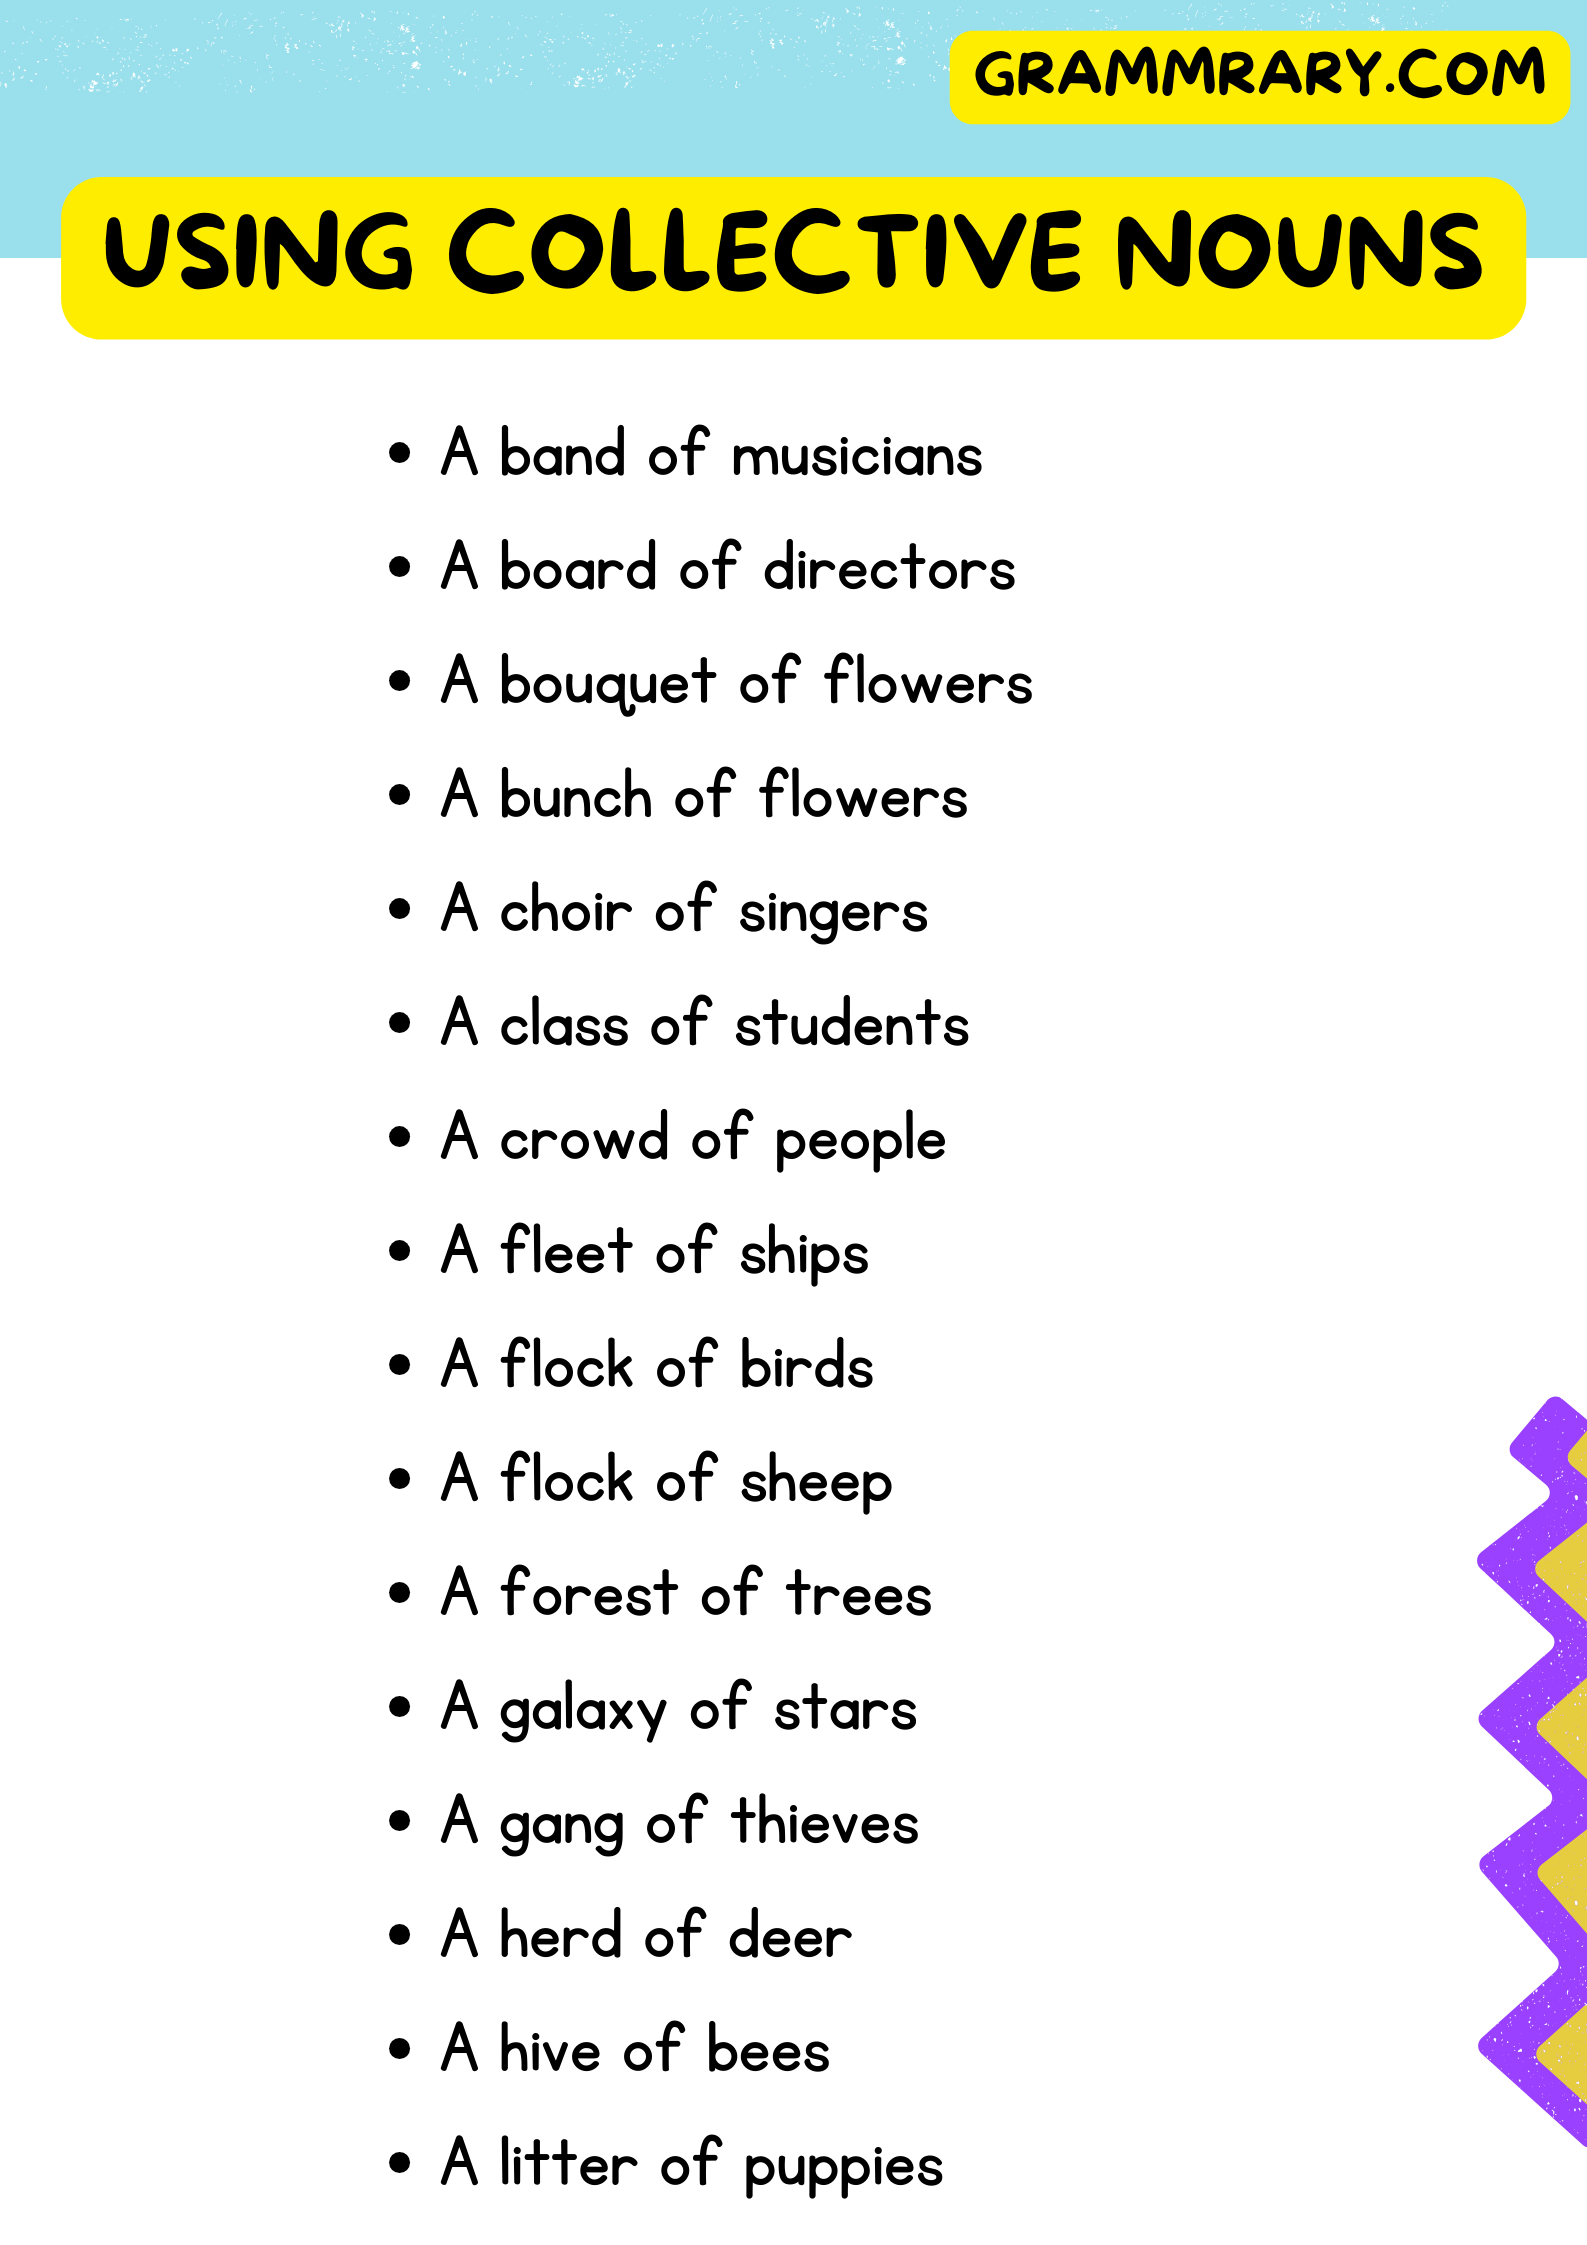 List of Collective Nouns